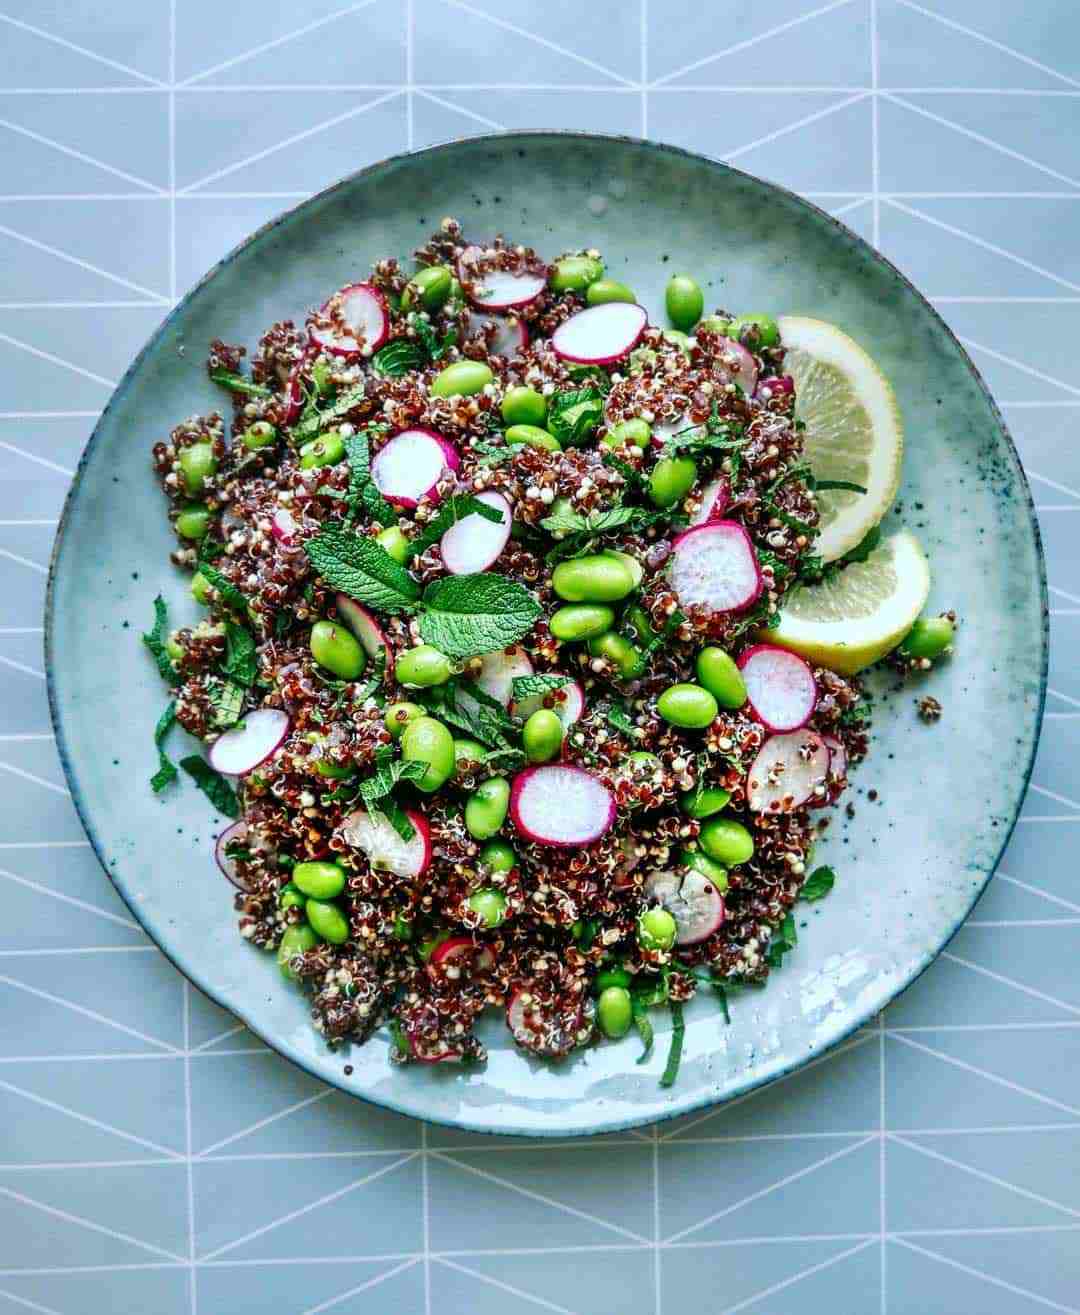 Quinoa salad – Healthy recipe with radishes and mint